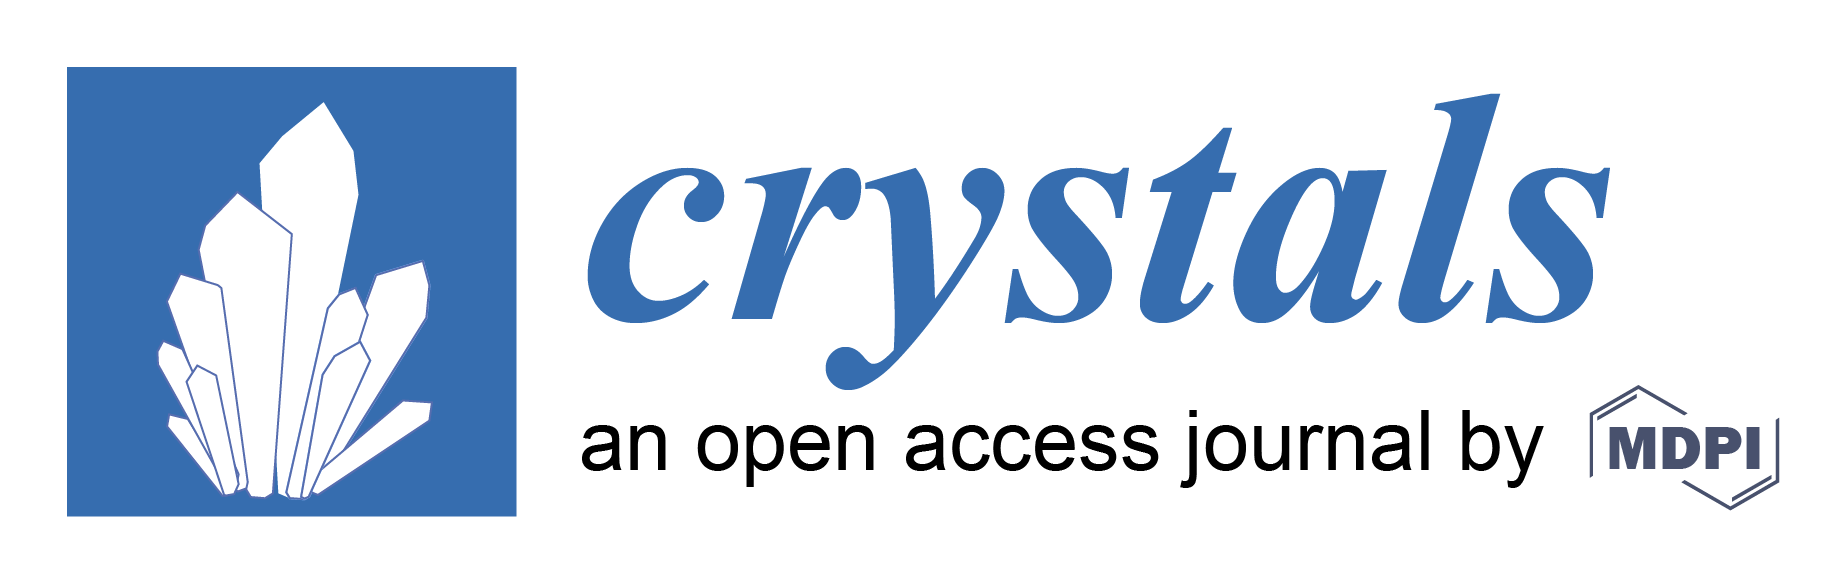 Crystals_conference banner